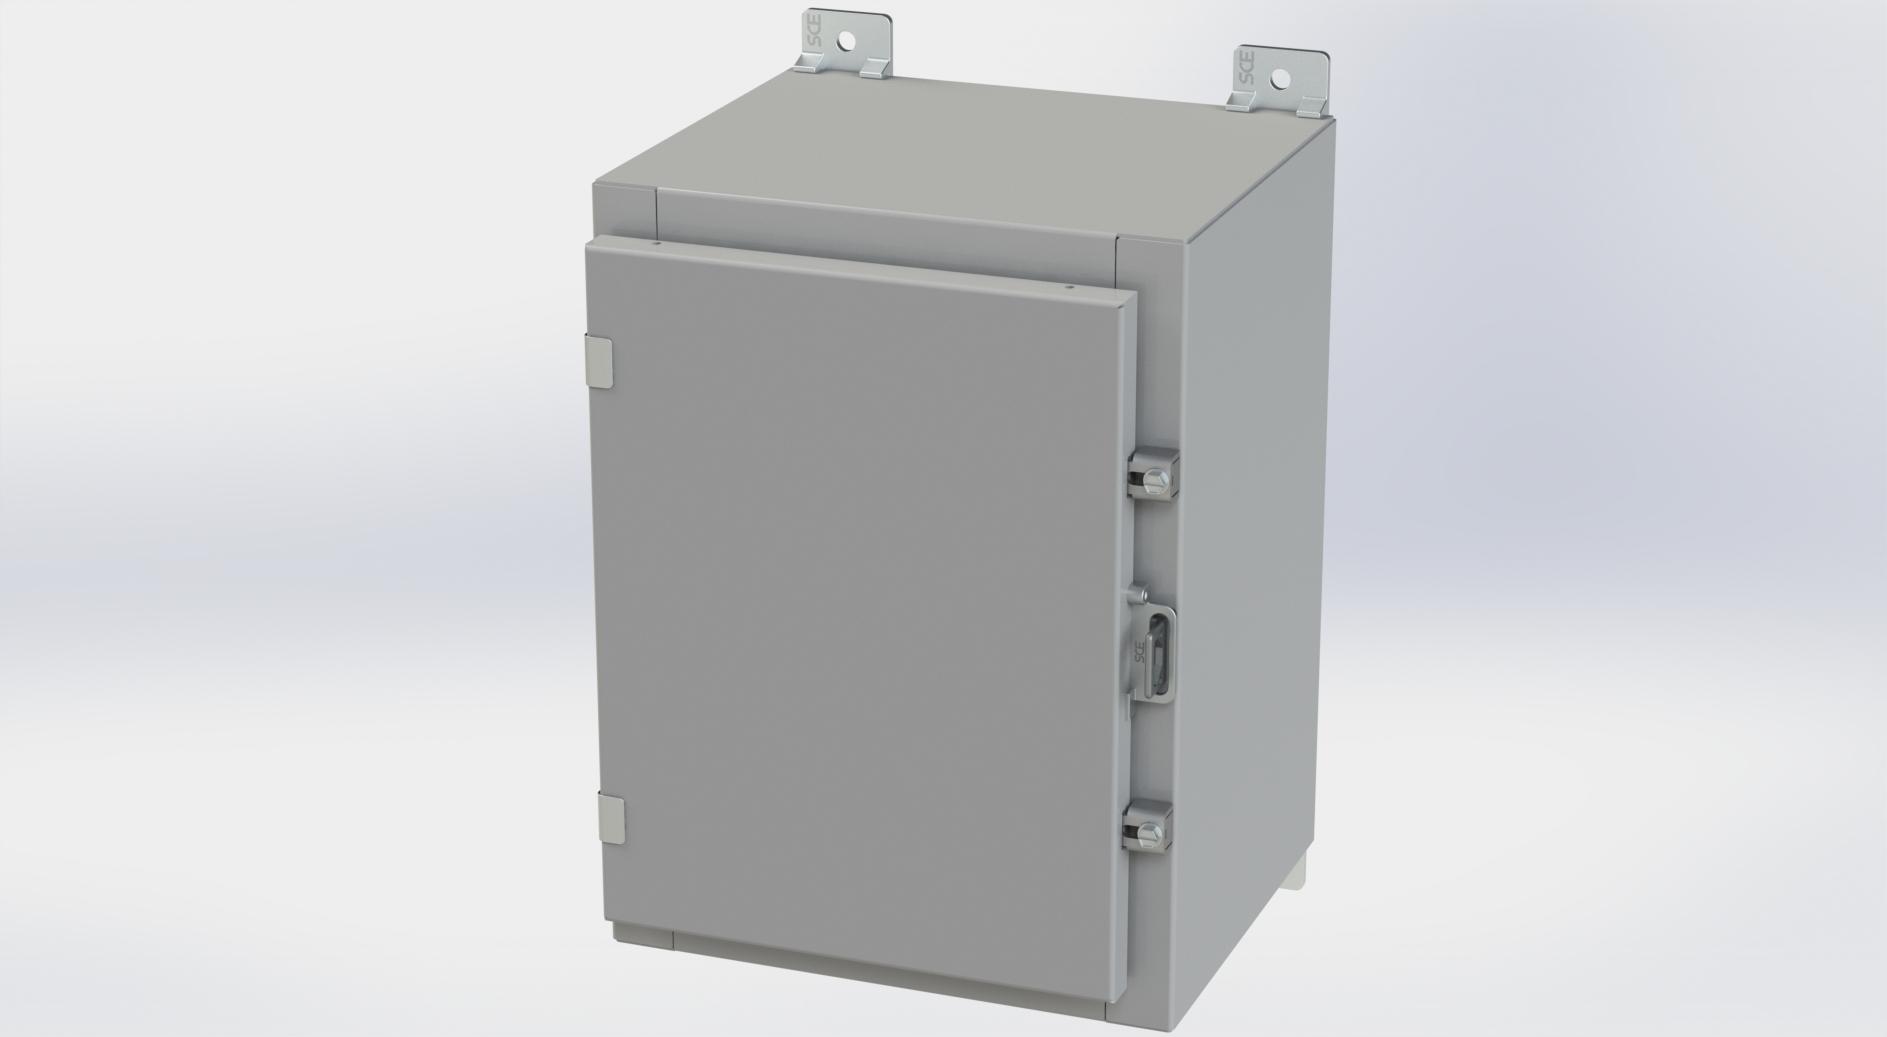 Saginaw Control SCE-16H1210LP Nema 4 LP Enclosure, Height:16.00", Width:12.00", Depth:10.00", ANSI-61 gray powder coating inside and out. Optional panels are powder coated white.